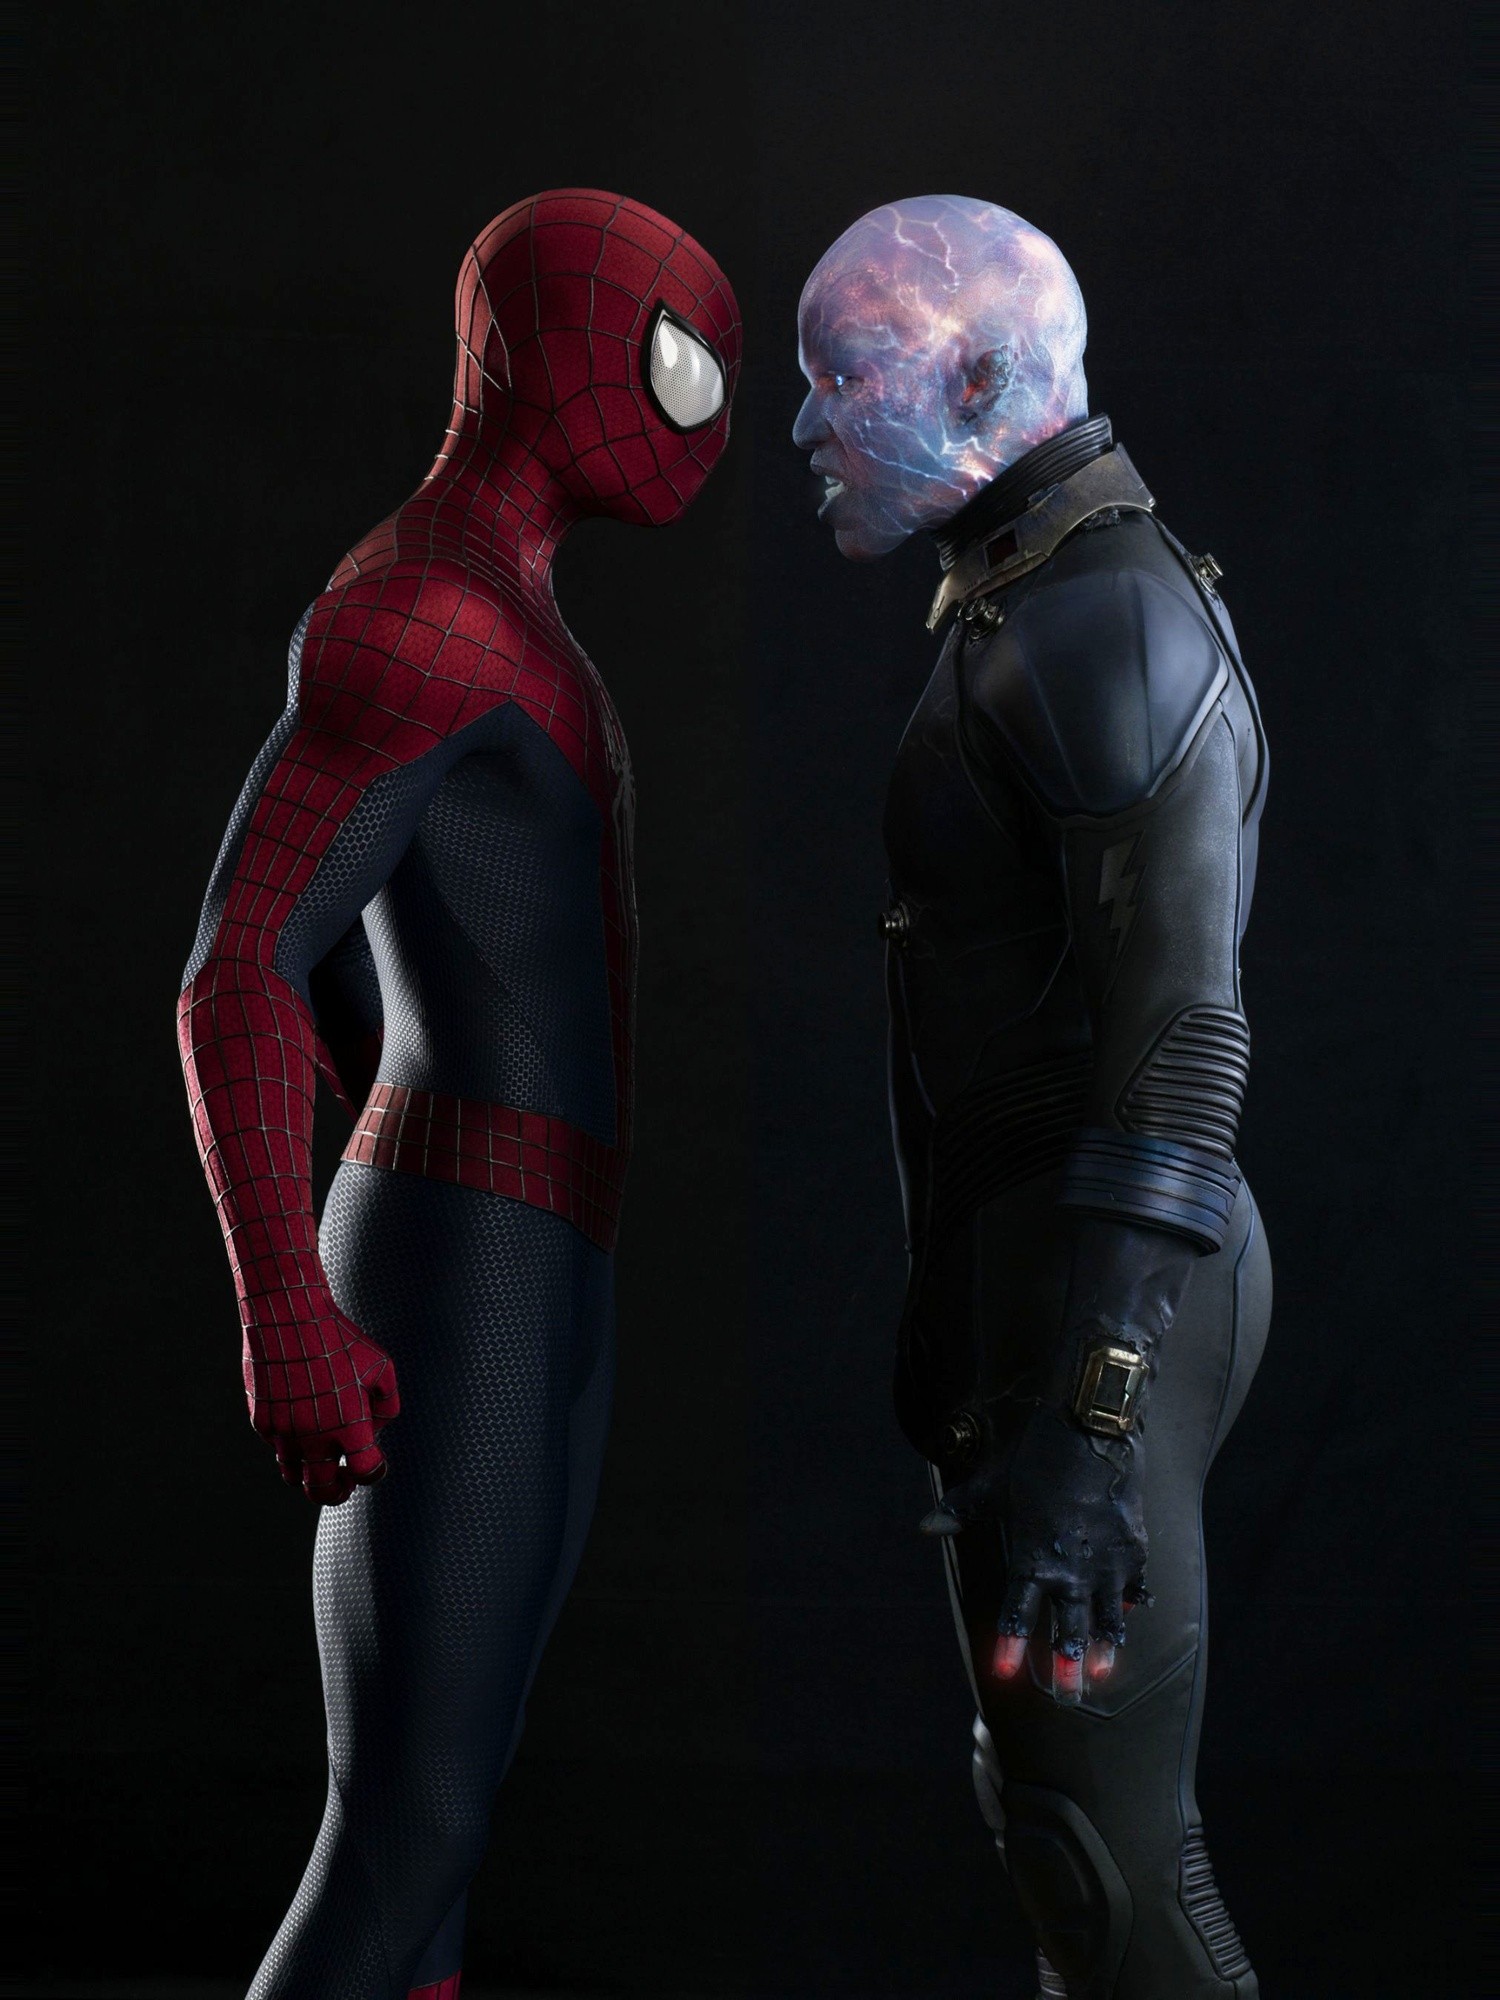 Spider-Man and Jamie Foxx stars as Max Dillon/Electro in Columbia Pictures' The Amazing Spider-Man 2 (2014). Photo credit by Kevin Lynch